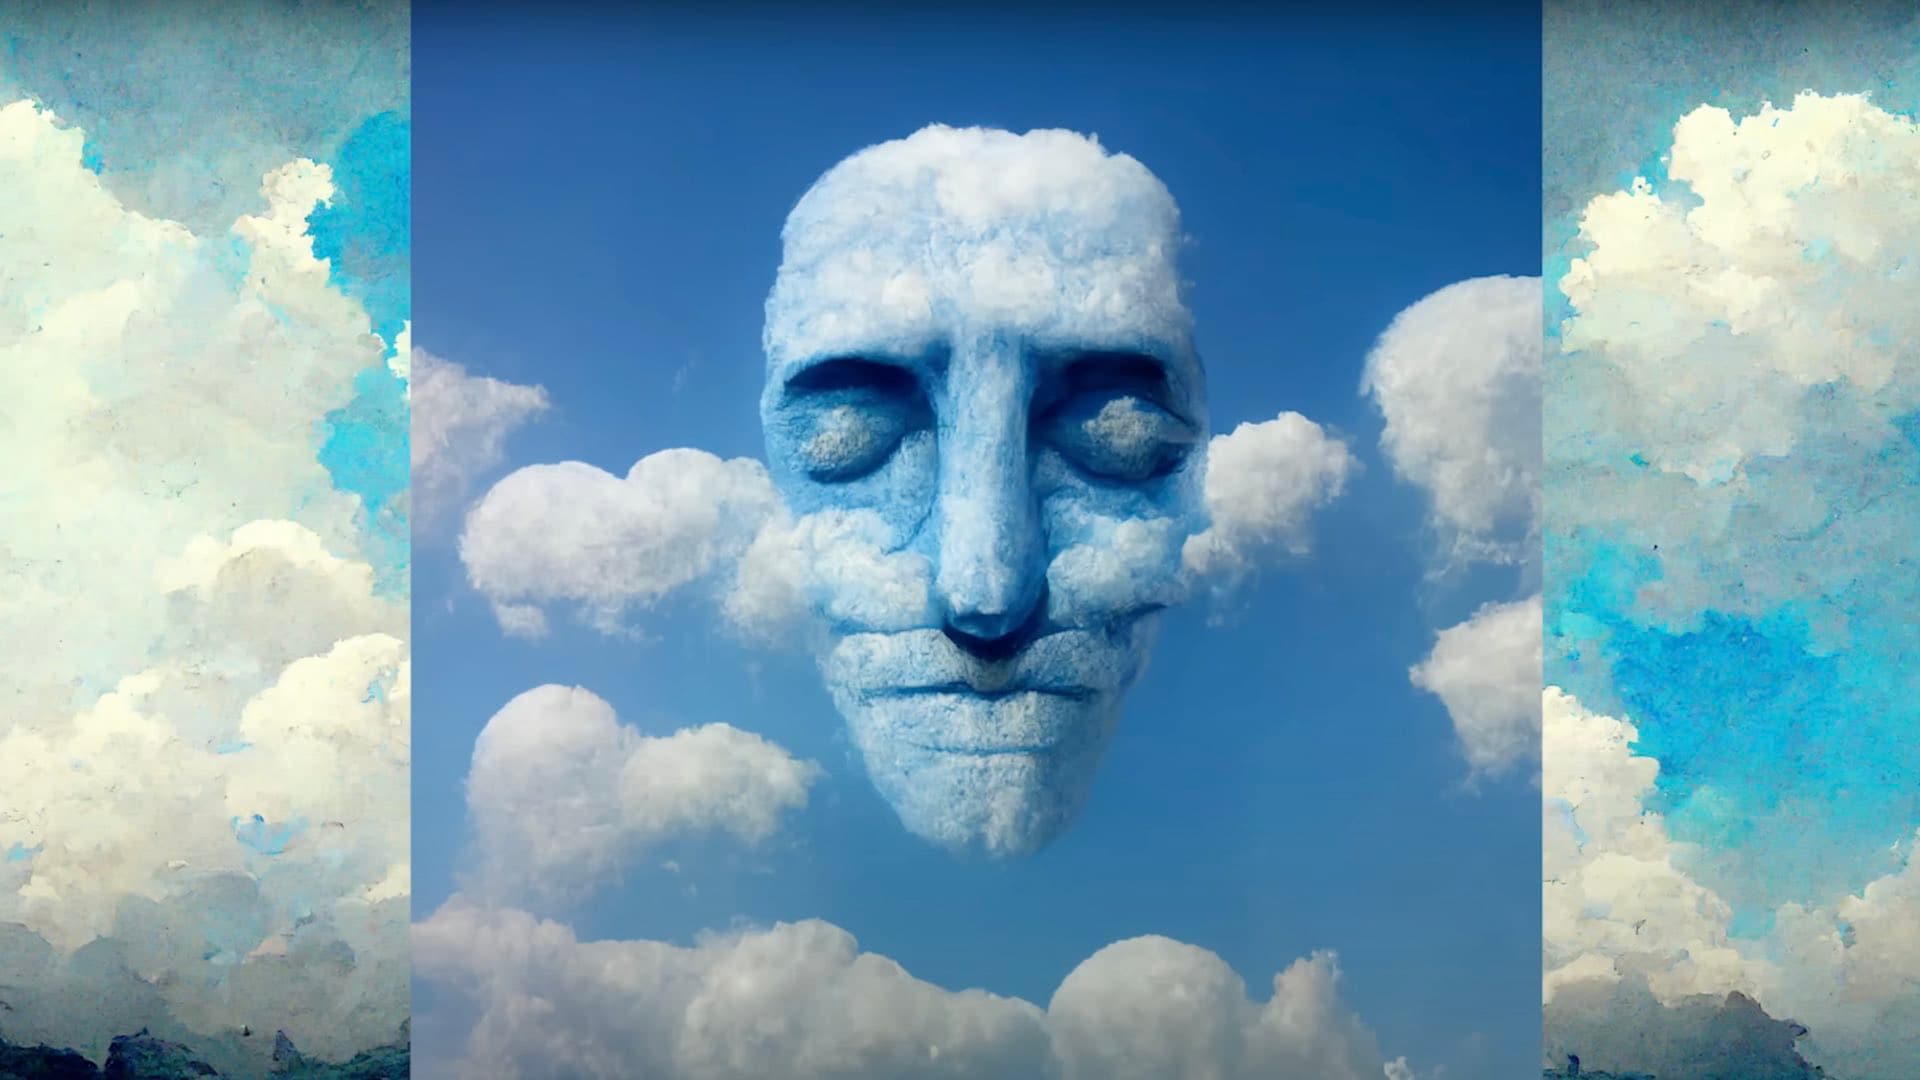 Mr Blue Sky himself as generated by Midjourney